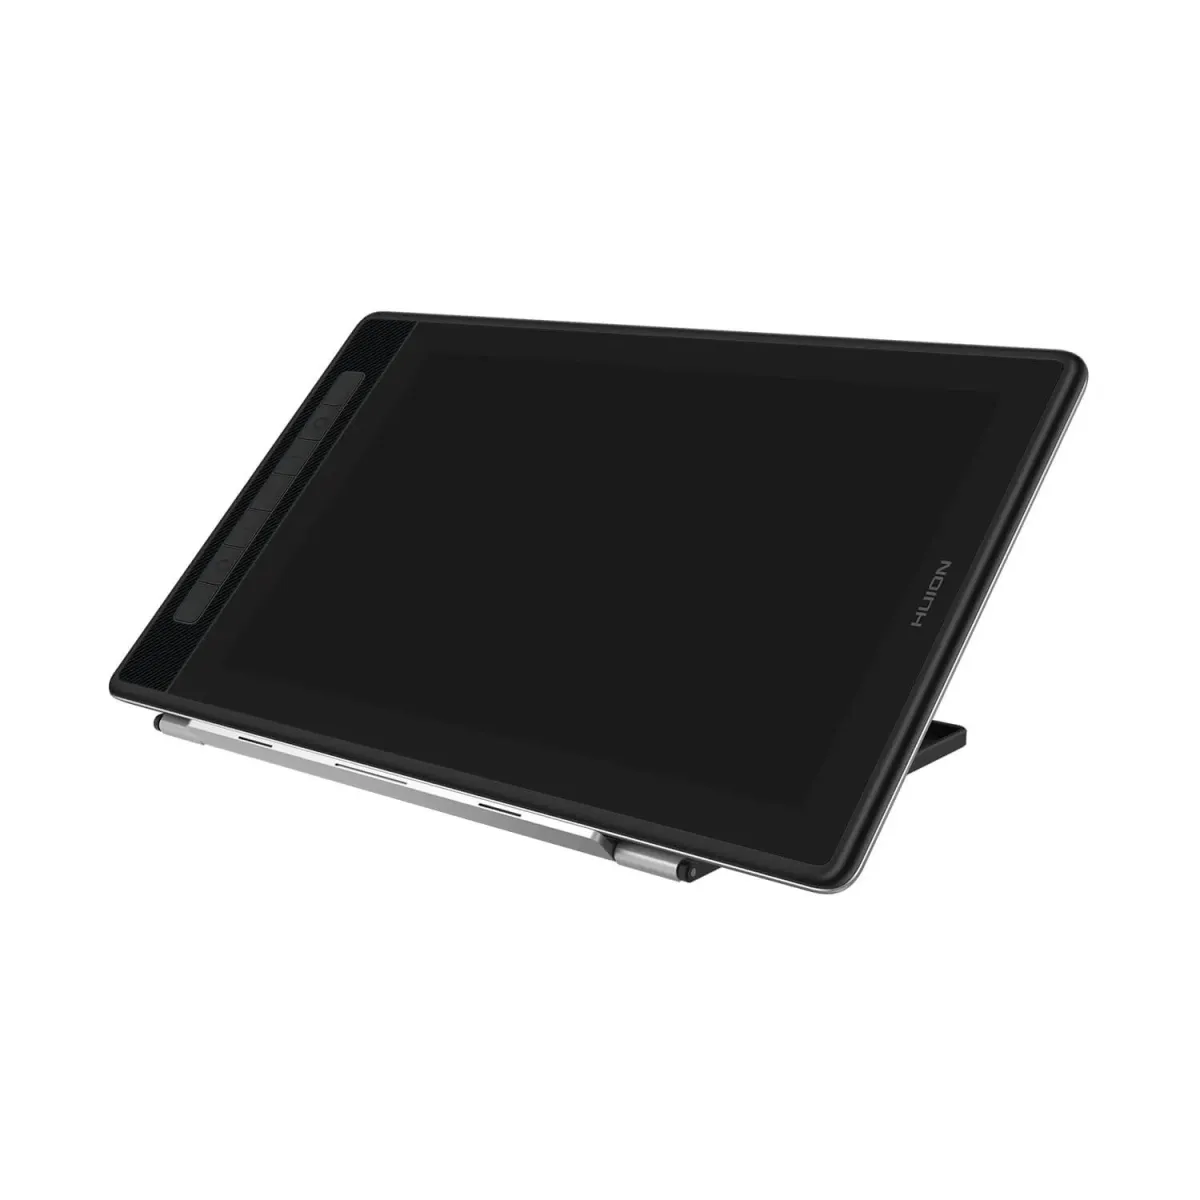 Huion Kamvas Pro 13 (2.5K) 13inch QHD+ Drawing Tablet with QLED Screen